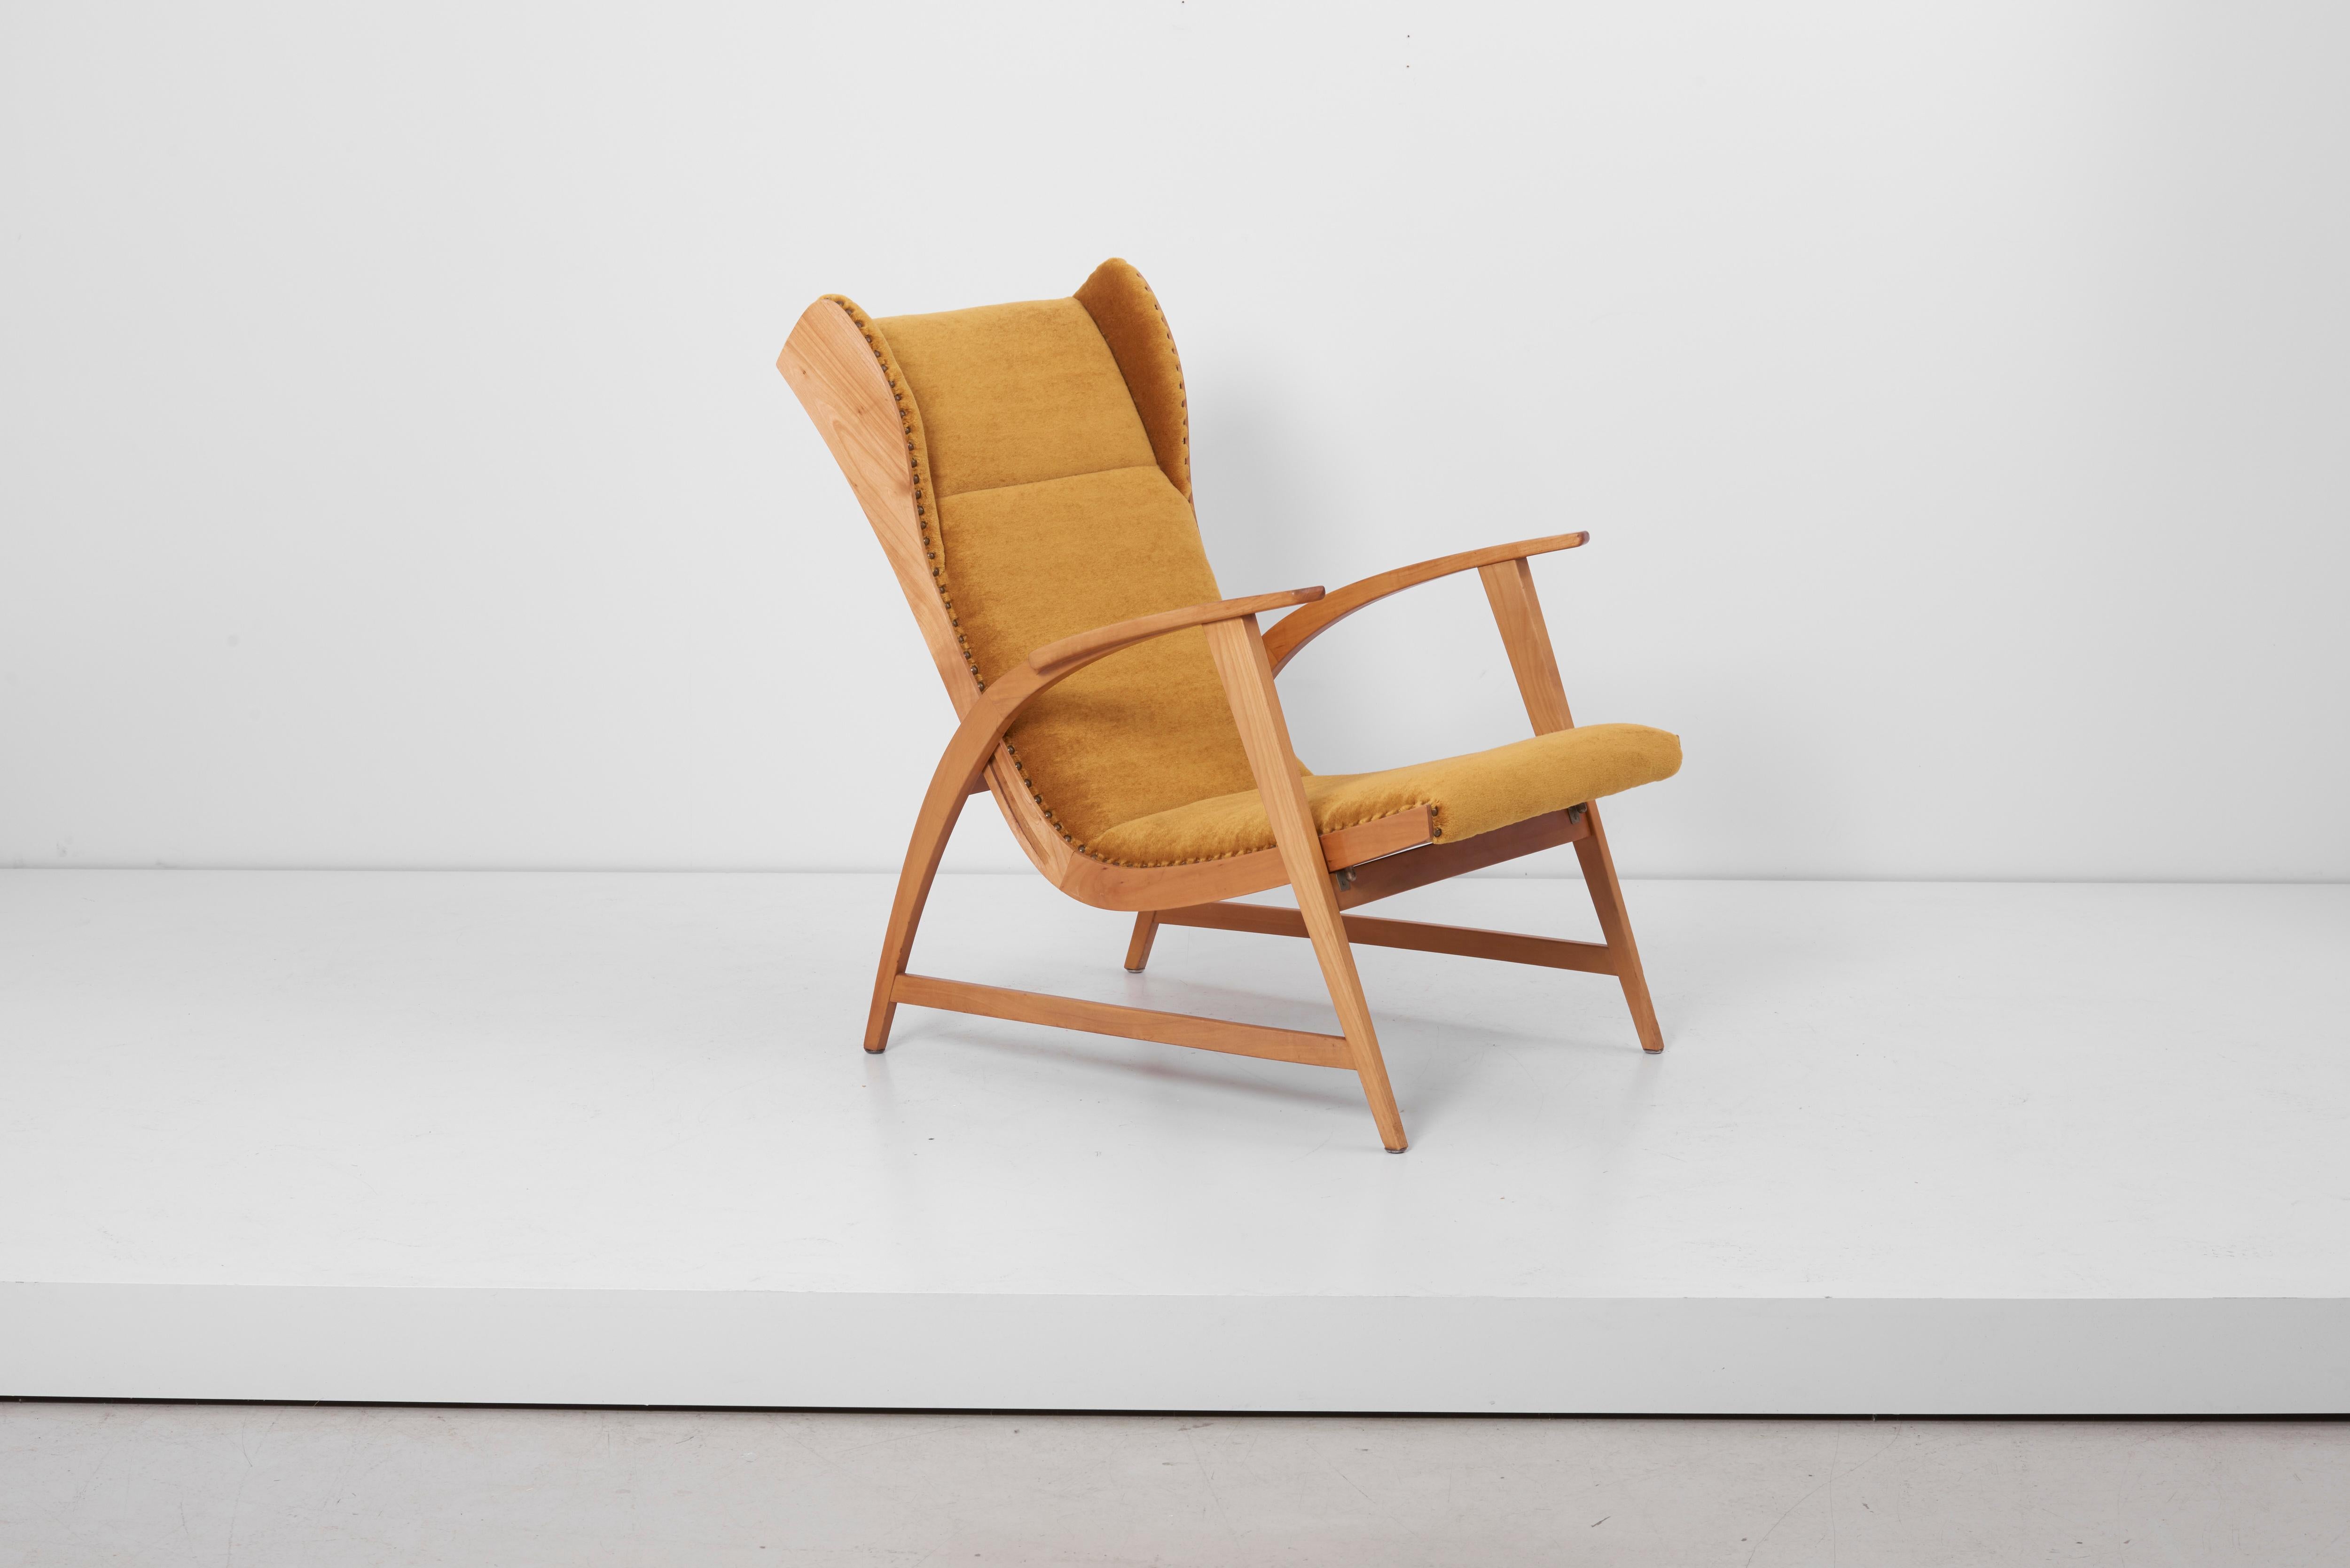 Lounge chair from the Knoll Antimott series. Manufactured in the 1950s by Wilhelm Knoll in Germany. Wooden base and professionally newly reupholstered in a high end amber mohair fabric by Kvadrat.
A matching rocking chair is also listed